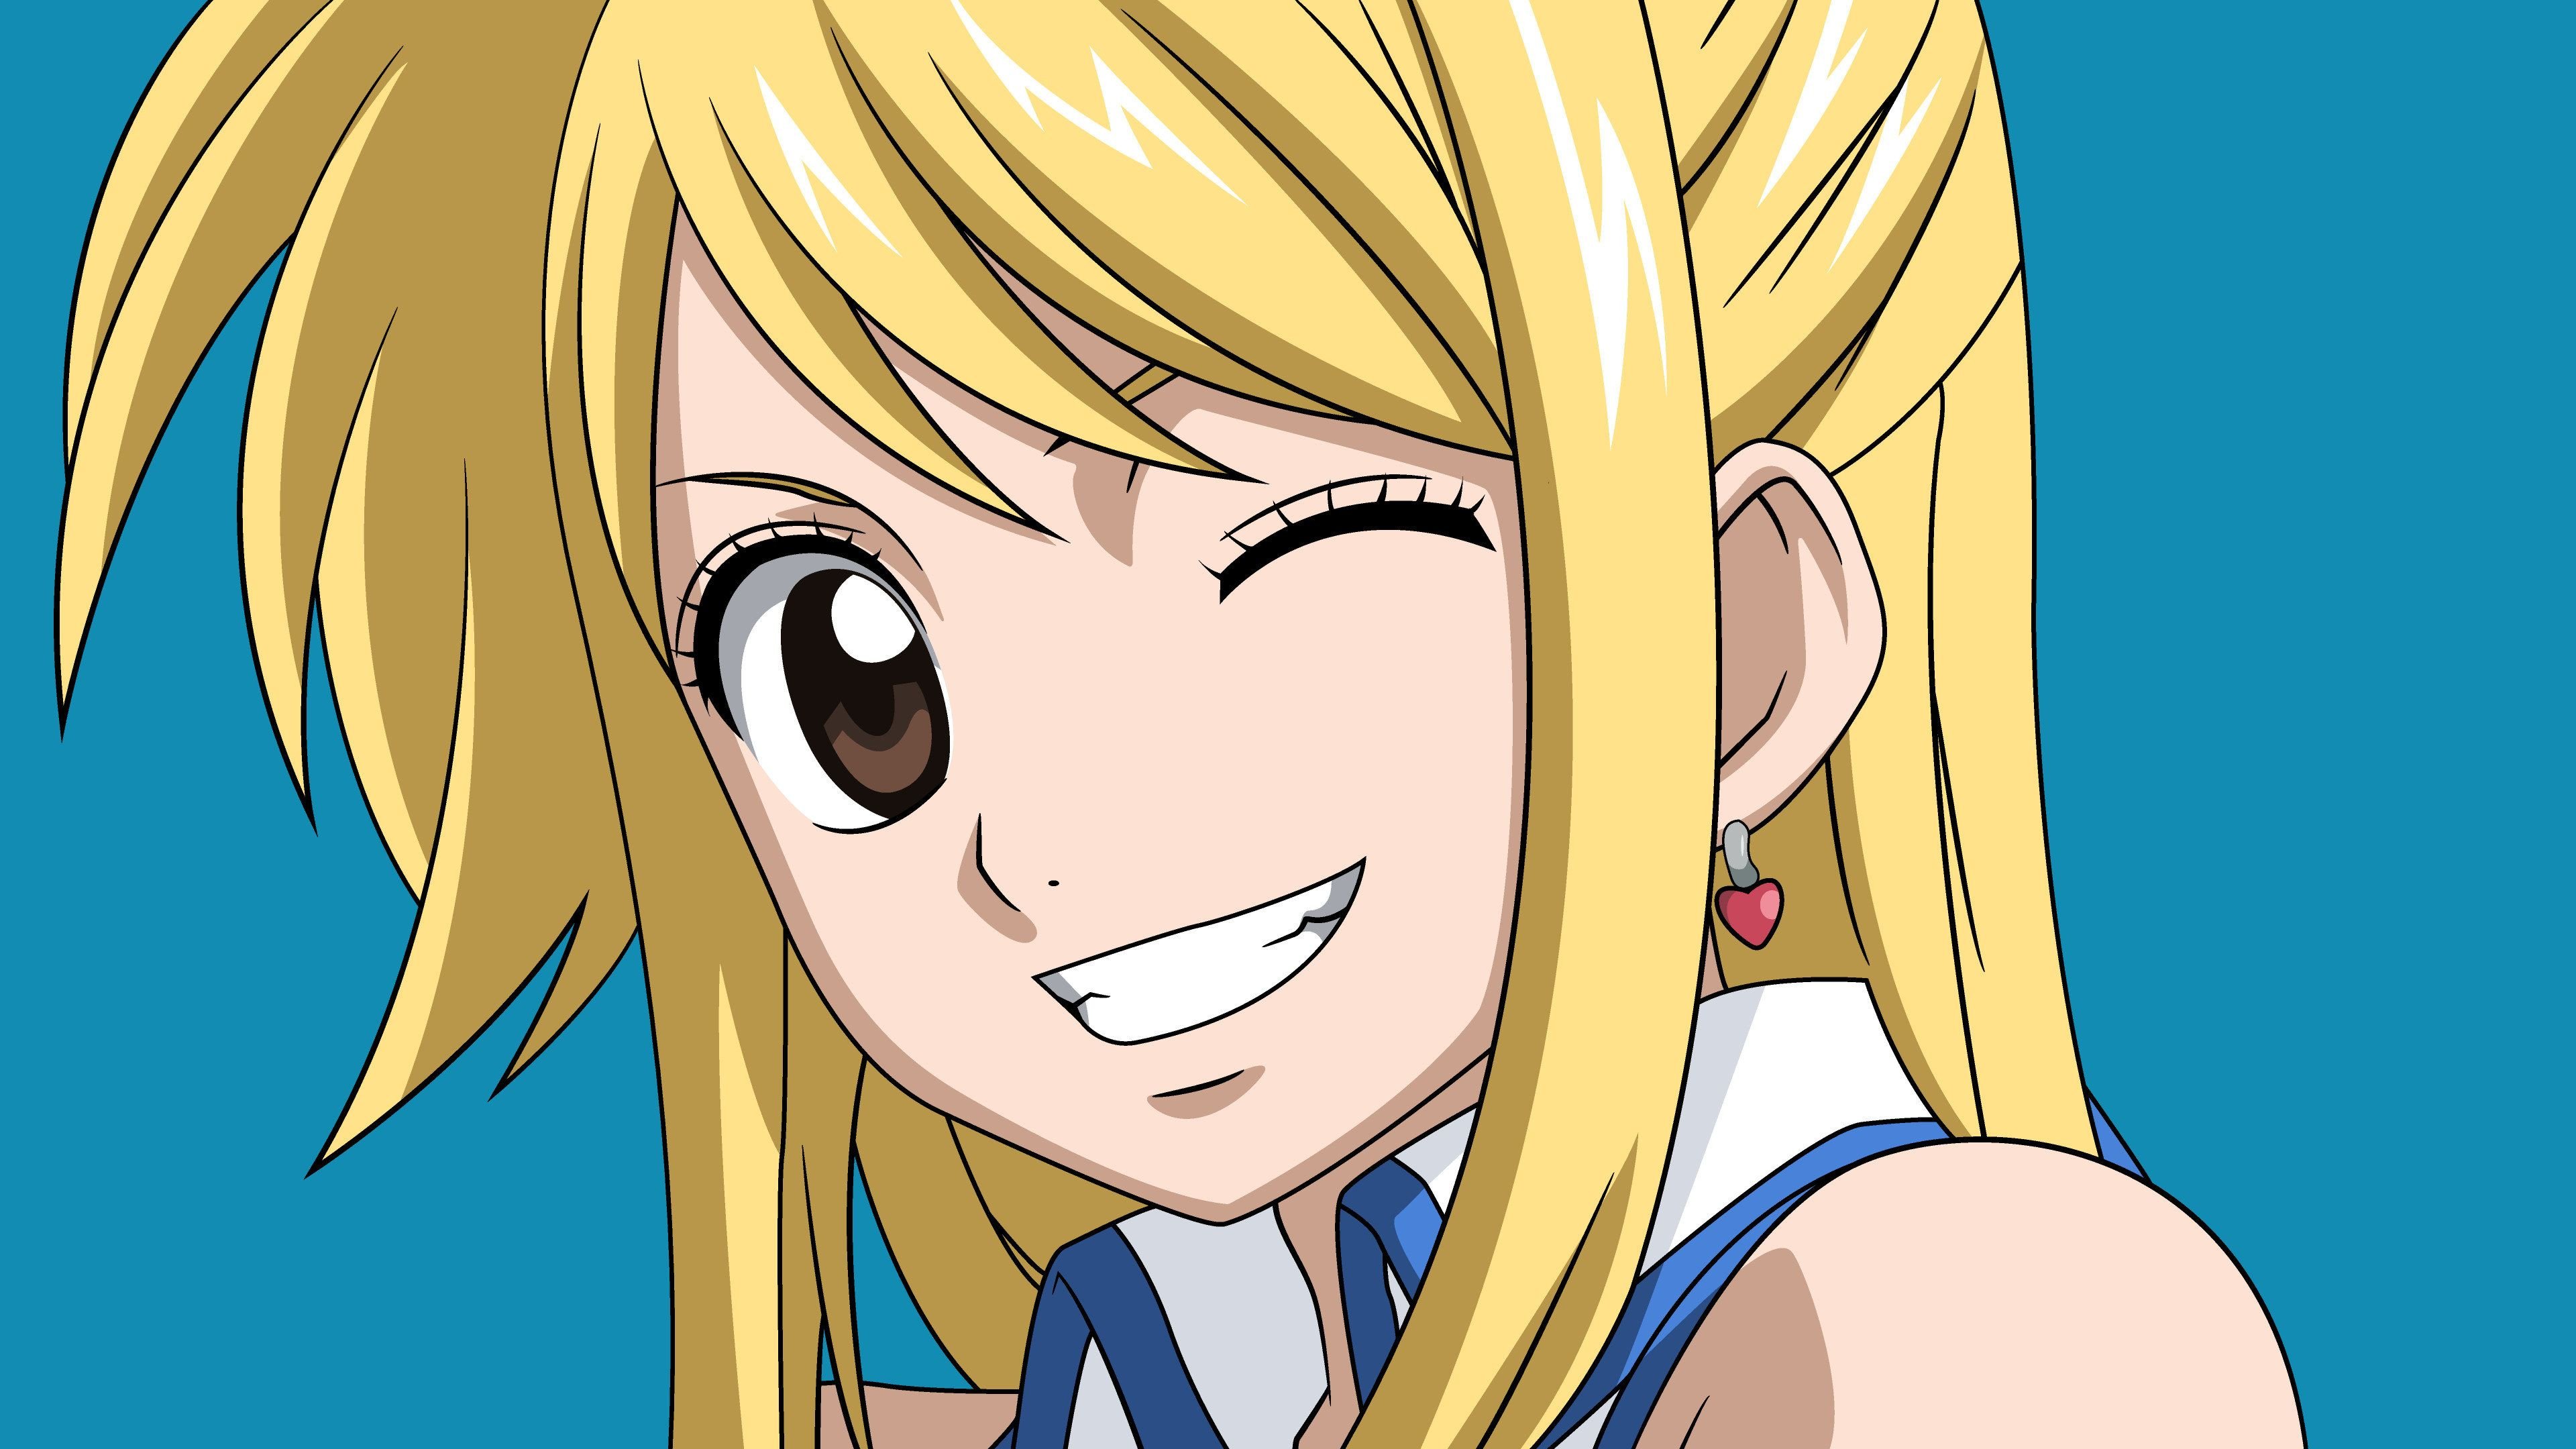 3. "Lucy Heartfilia" from Fairy Tail - wide 6